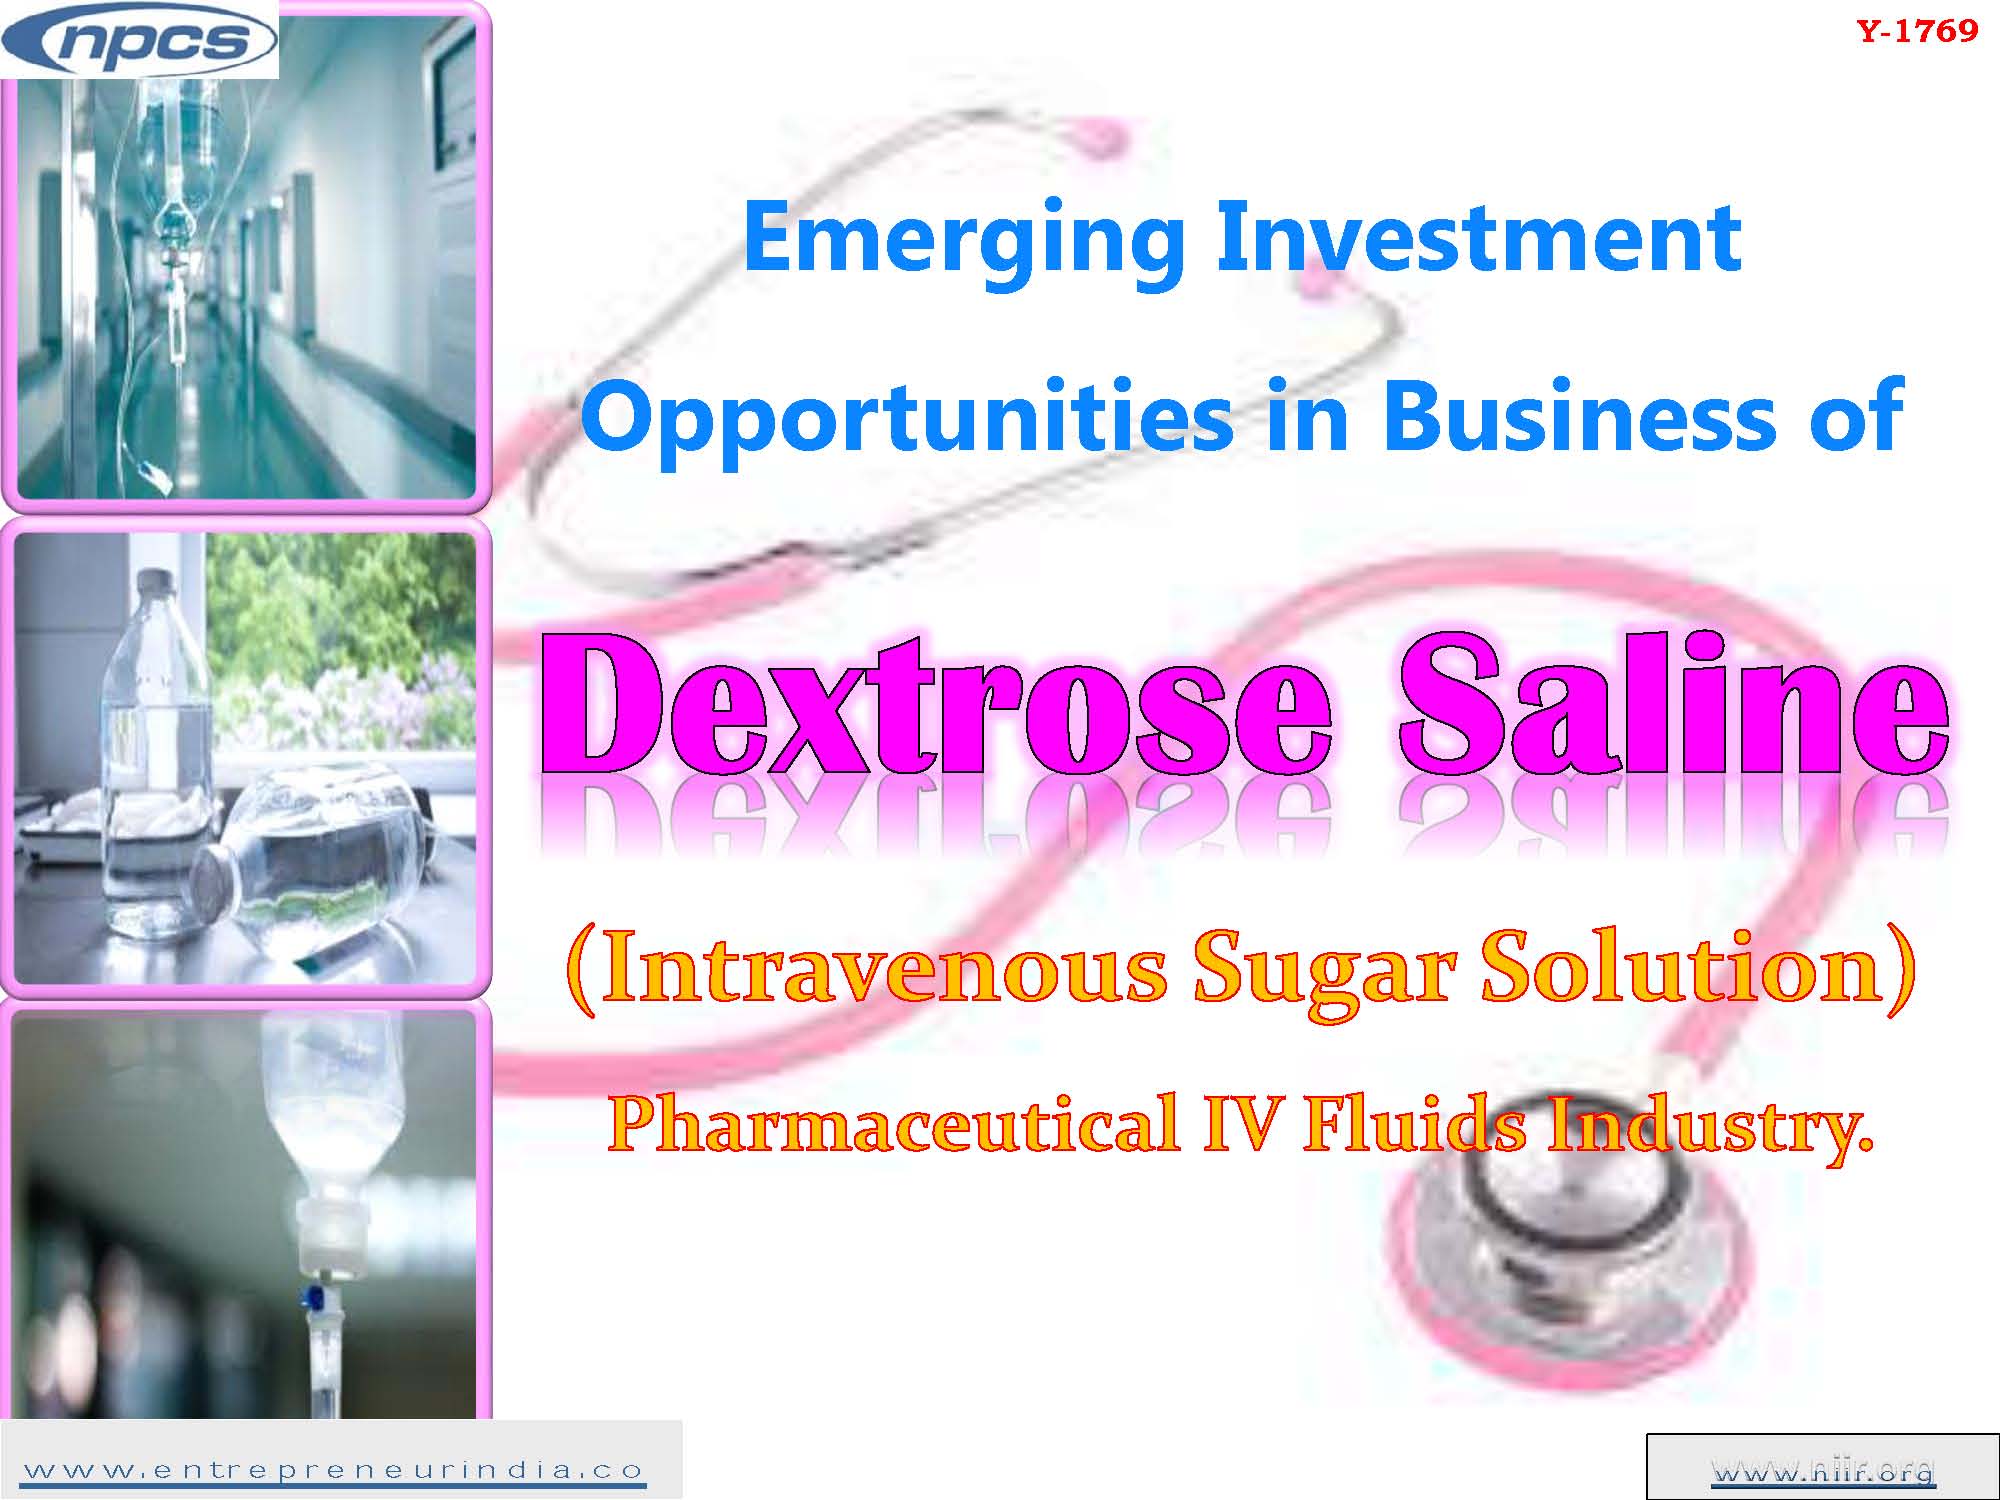 Emerging Investment Opportunities in Business of Dextrose Saline, Intravenous Sugar Solution Pharmaceutical IV Fluids Industry